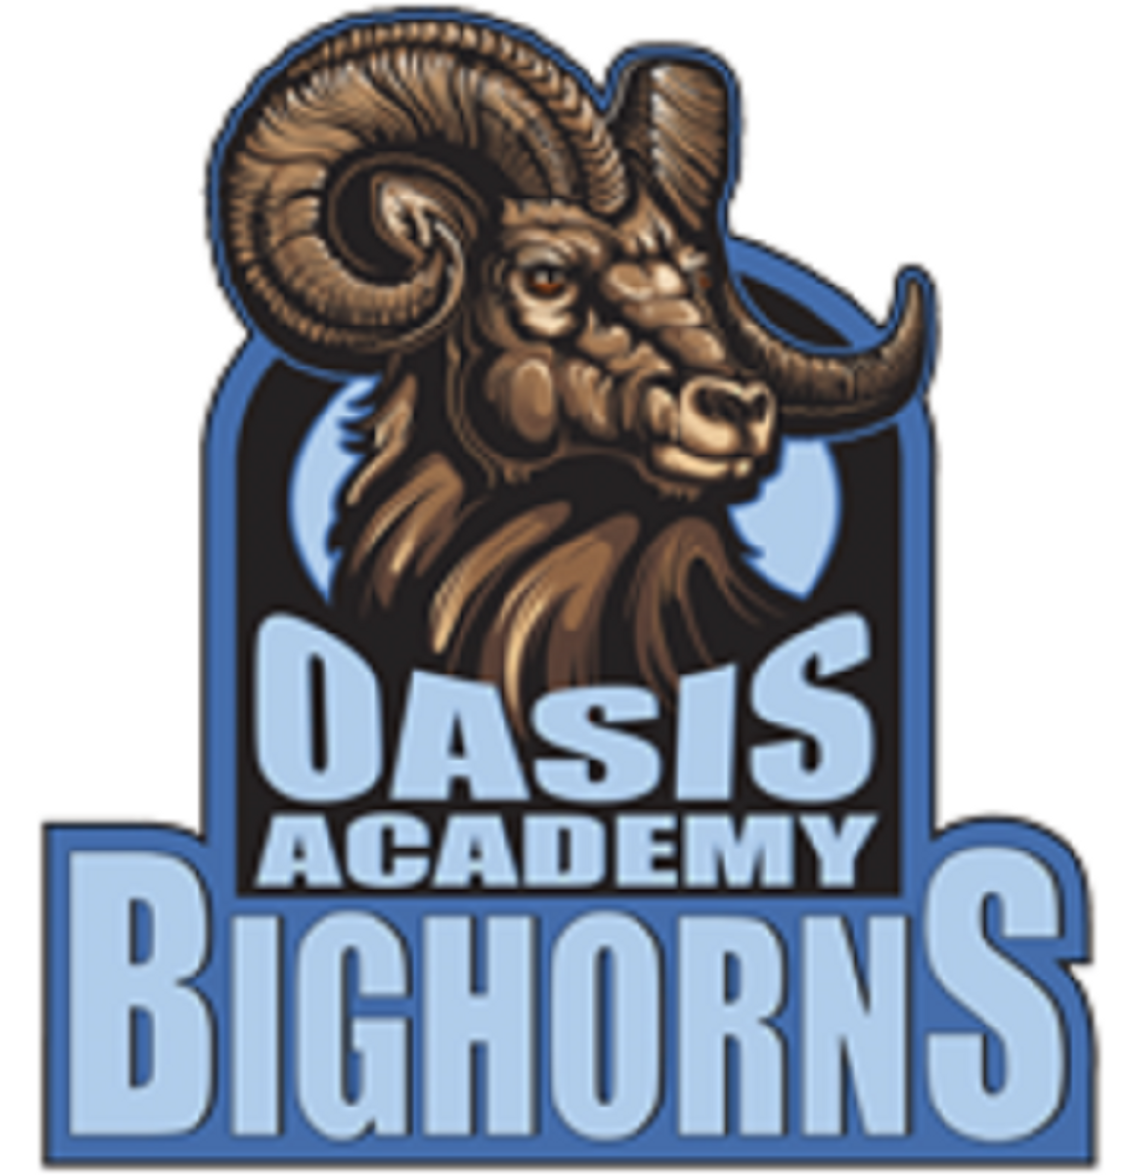 Oasis Academy Returns to Full Time Instruction